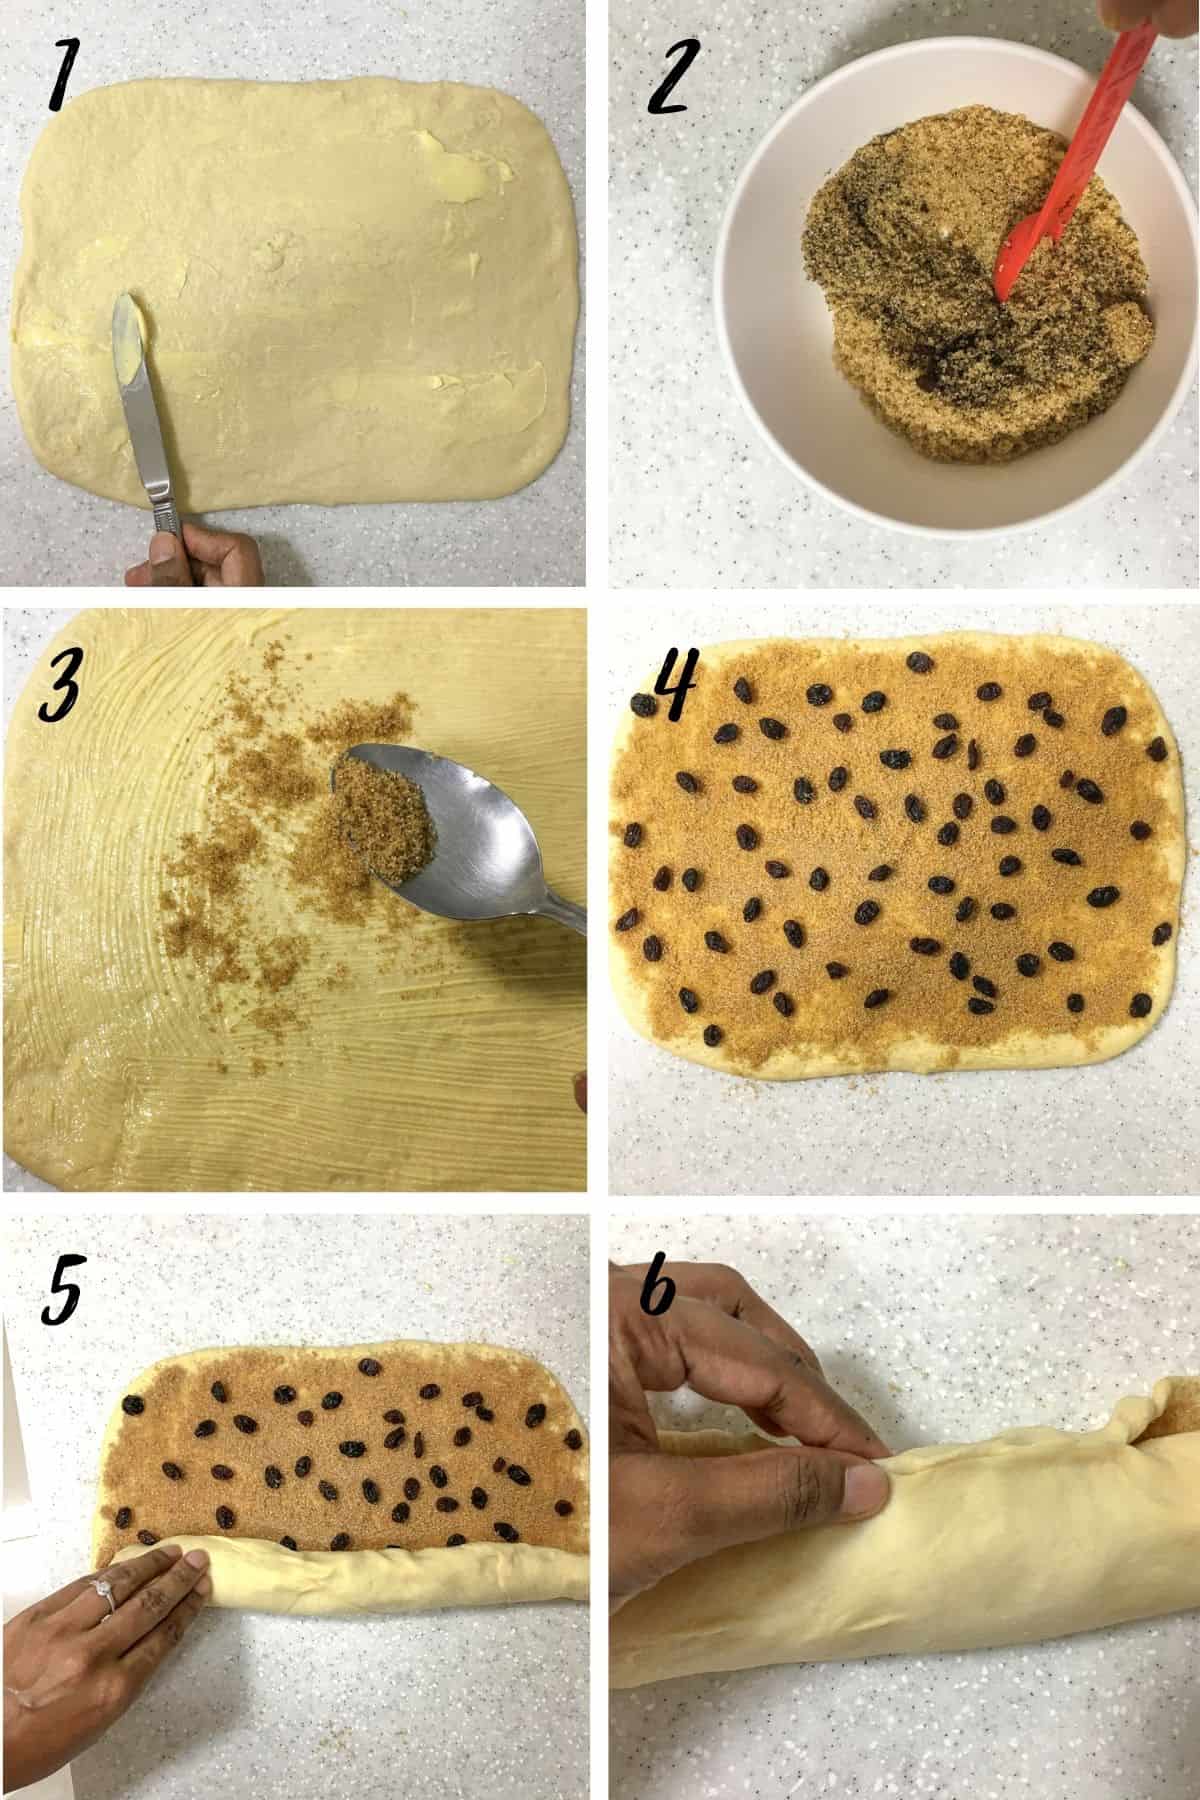 A poster of 6 images showing how to roll the cinnamon raisin rolls dough.